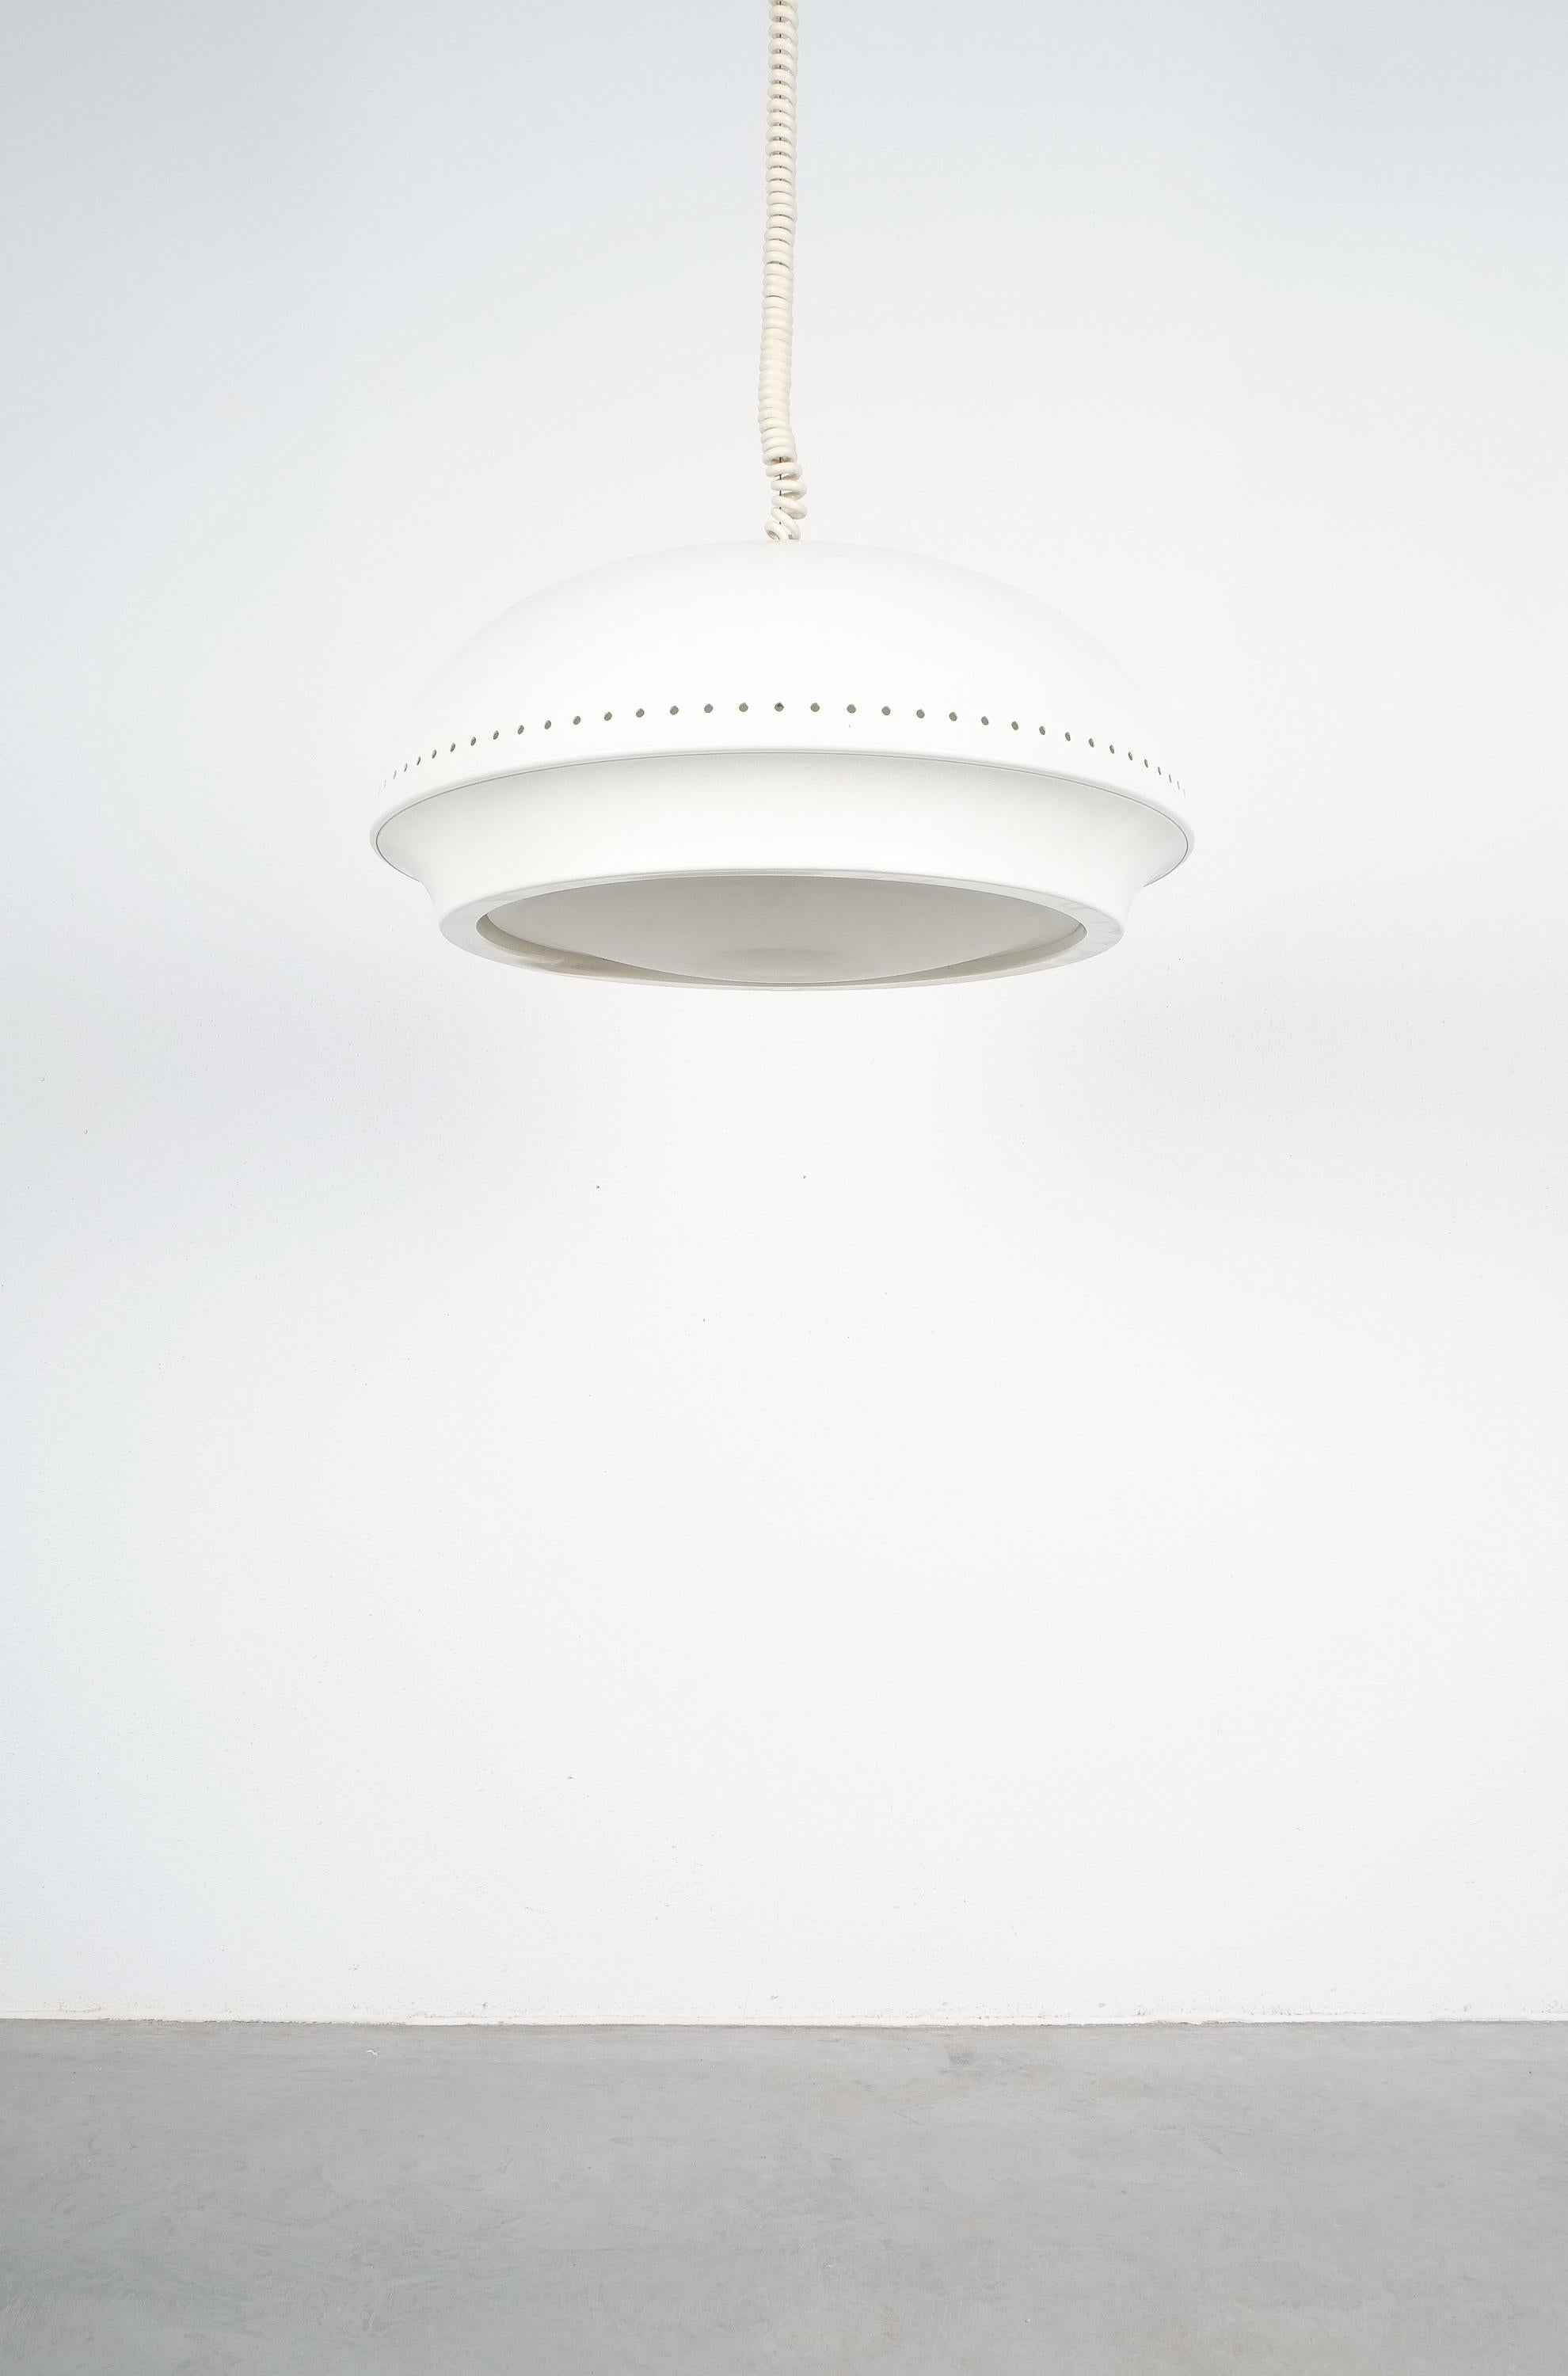 Nigritella pendant lamp by Afra & Tobia Scarpa for Flos, Italy

Fixture produced in the 1960s by Flos by Afra and Tobia Scarpa. White painted metal shade with and oplal glass screen. The fixture is in original, cleaned condition with one larger